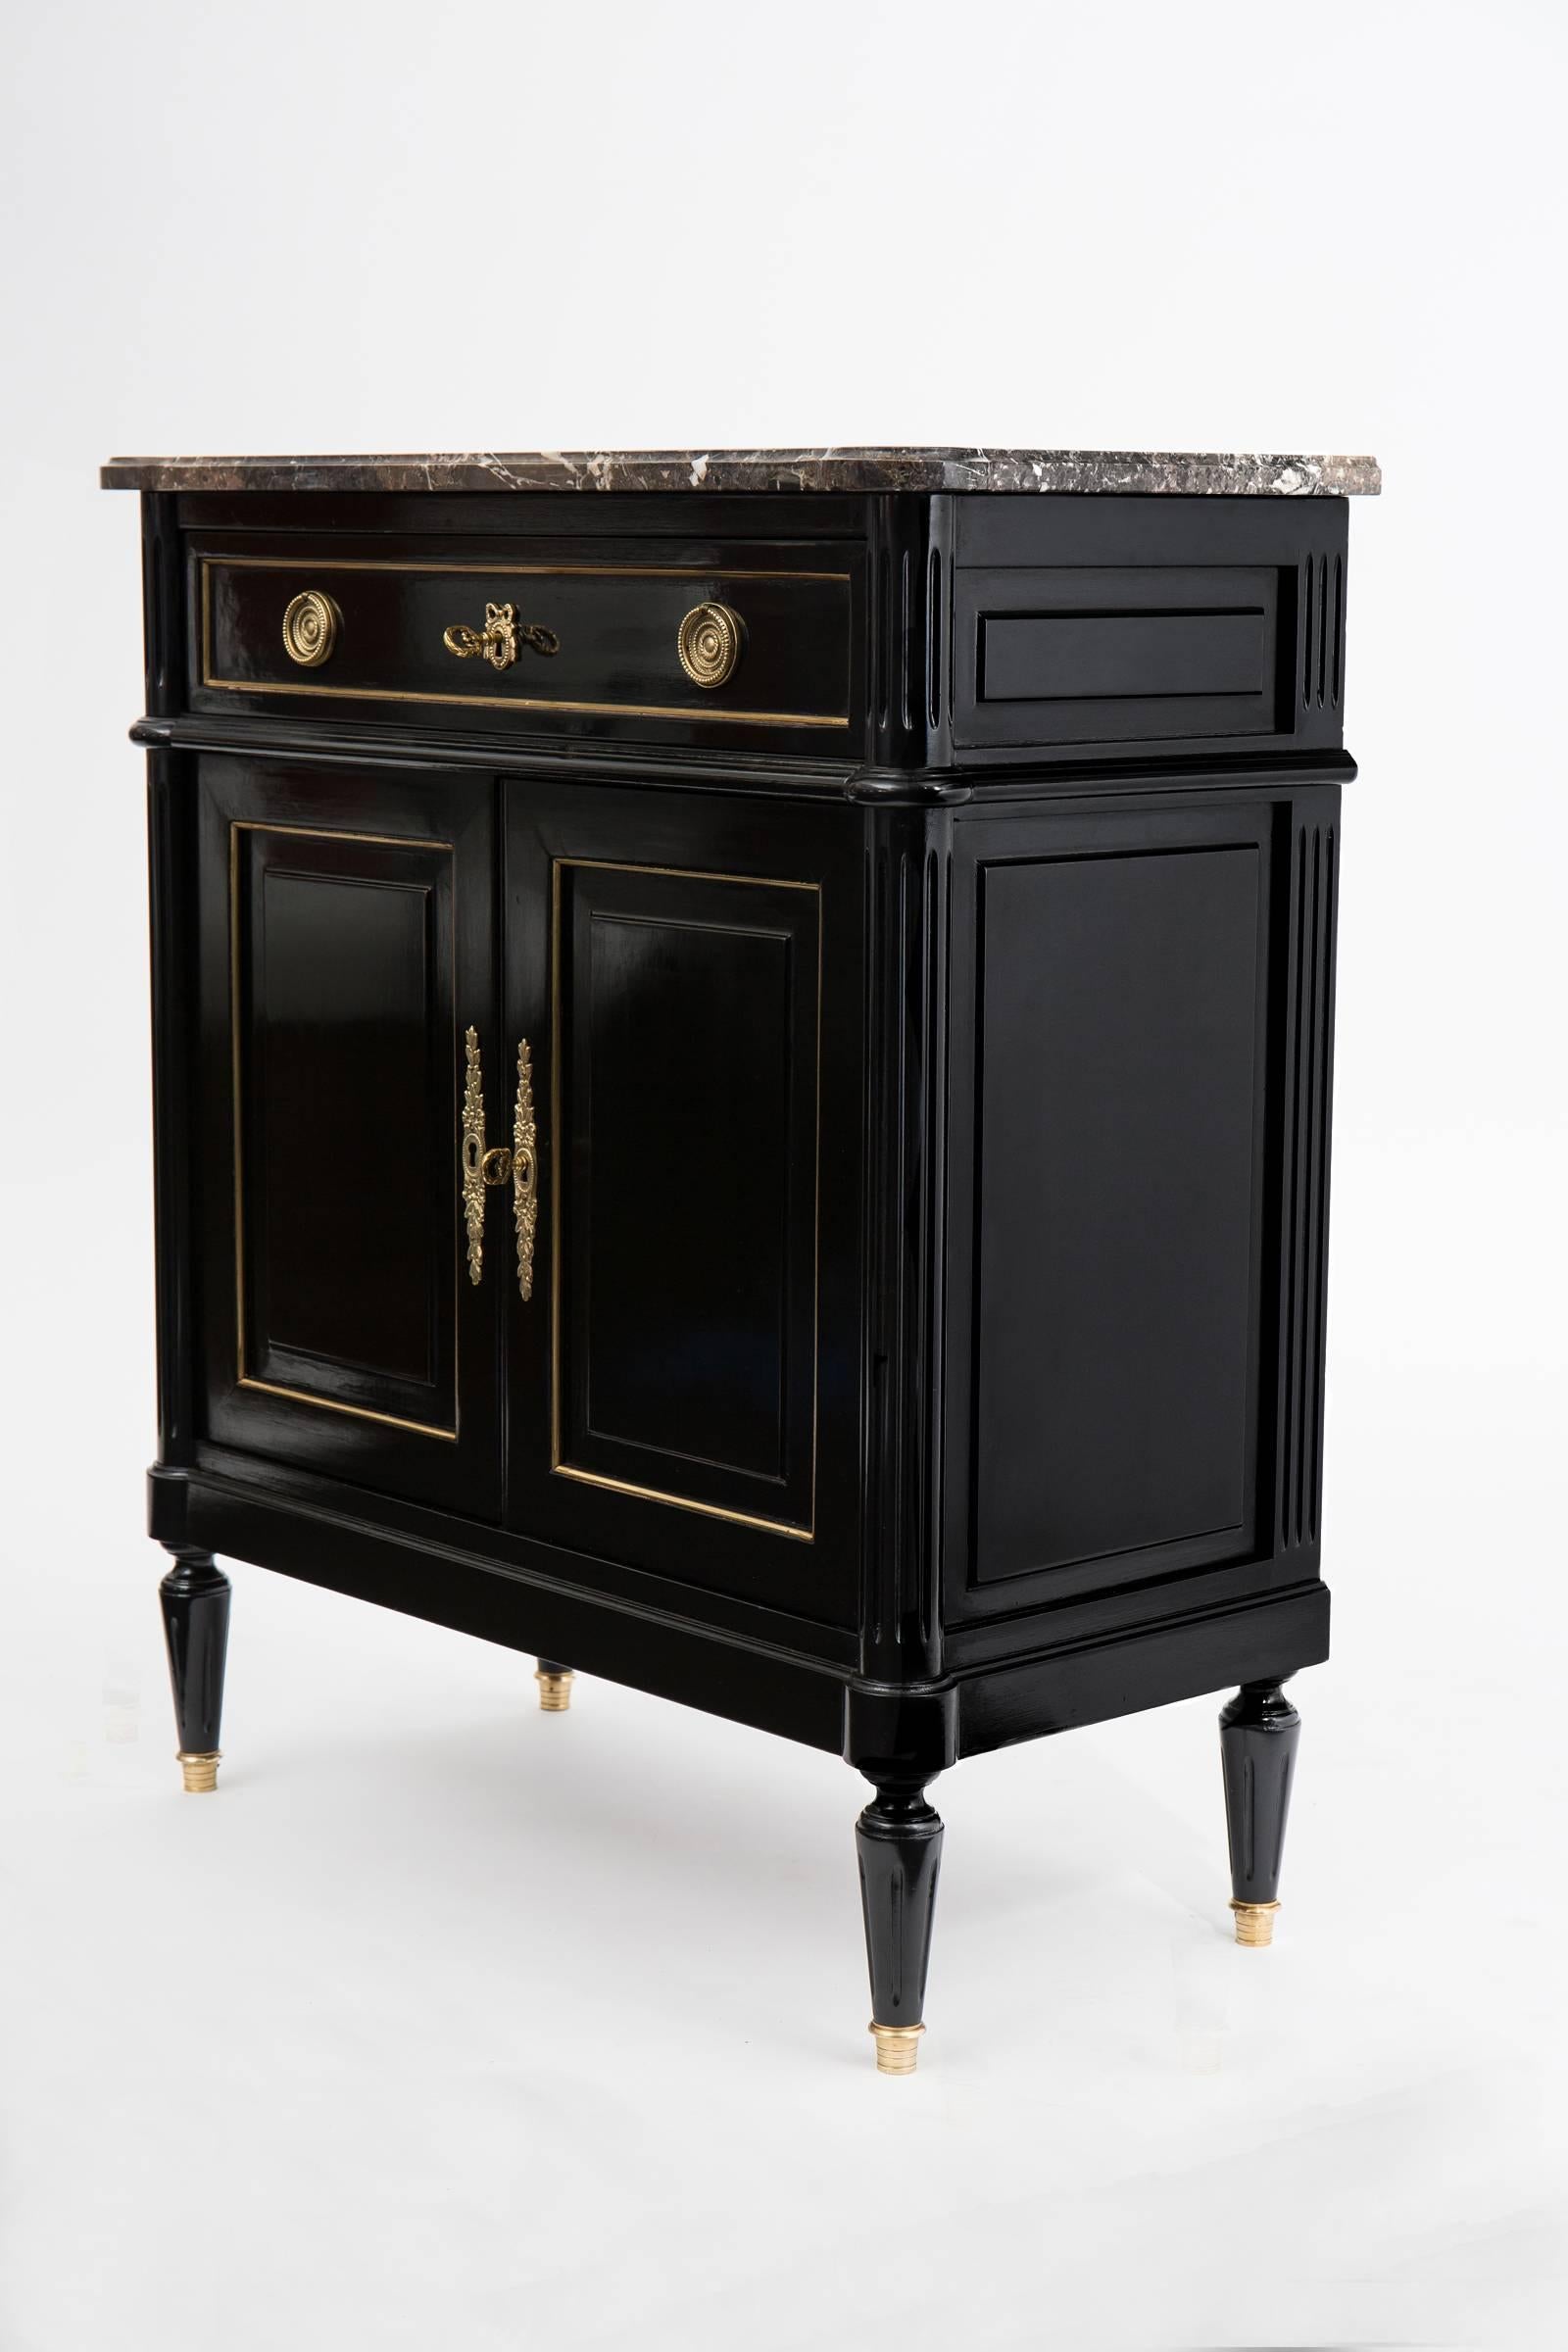 French antique solid mahogany buffet in the style of Louis XVI with a Brêche d'Alep brown and grey marble slab top. With its high quality construction, the gilt trim throughout and its finely cast decorative hardware, this charming buffet will take